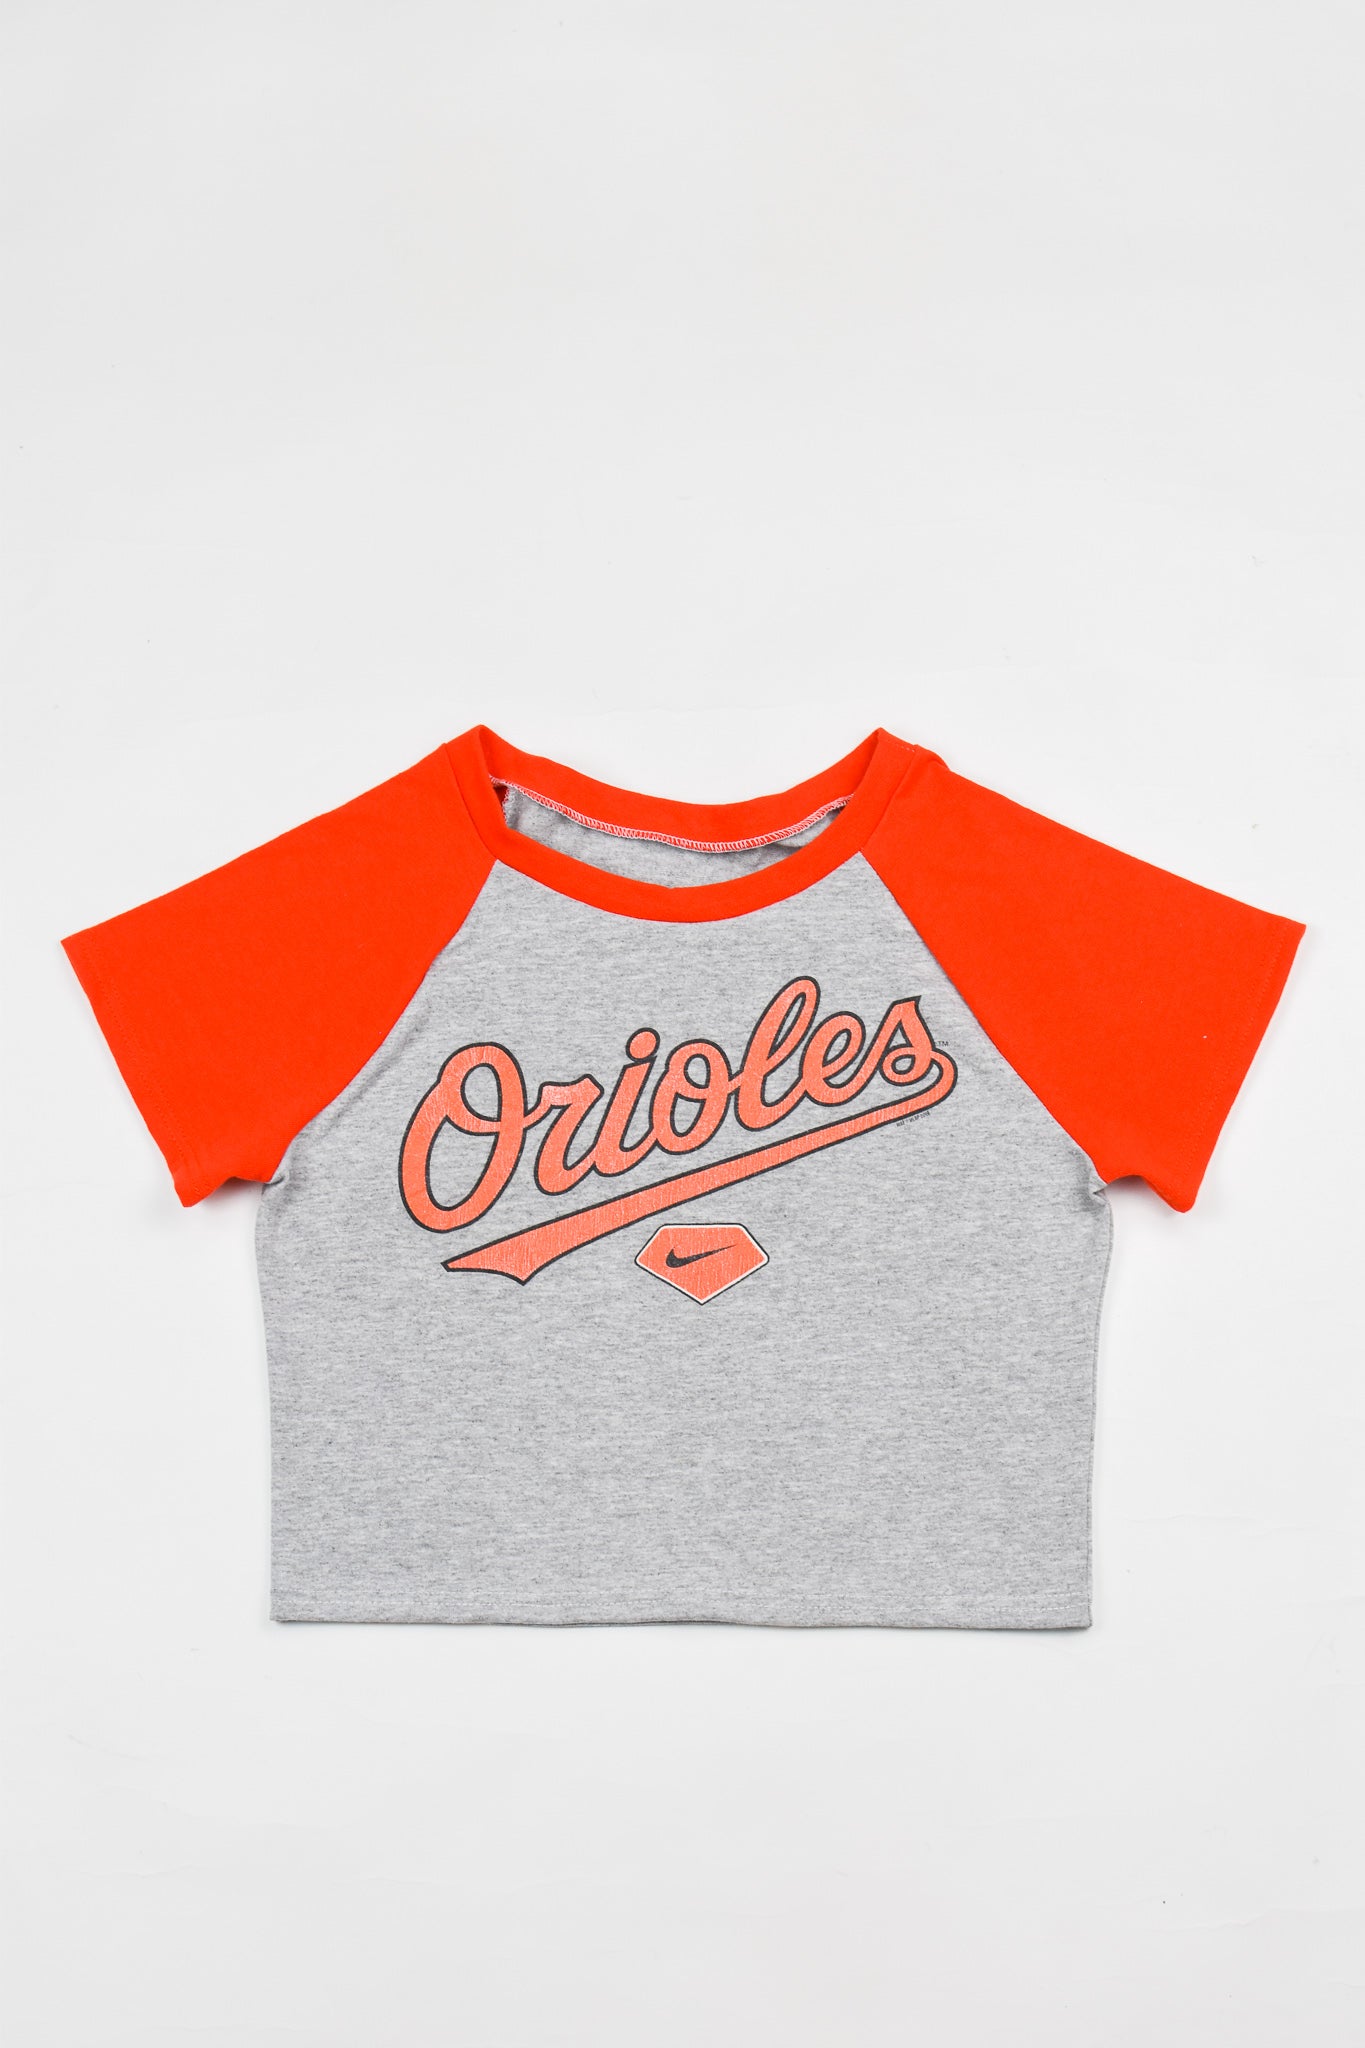 Baltimore Orioles Baby Apparel, Baby Orioles Clothing, Merchandise